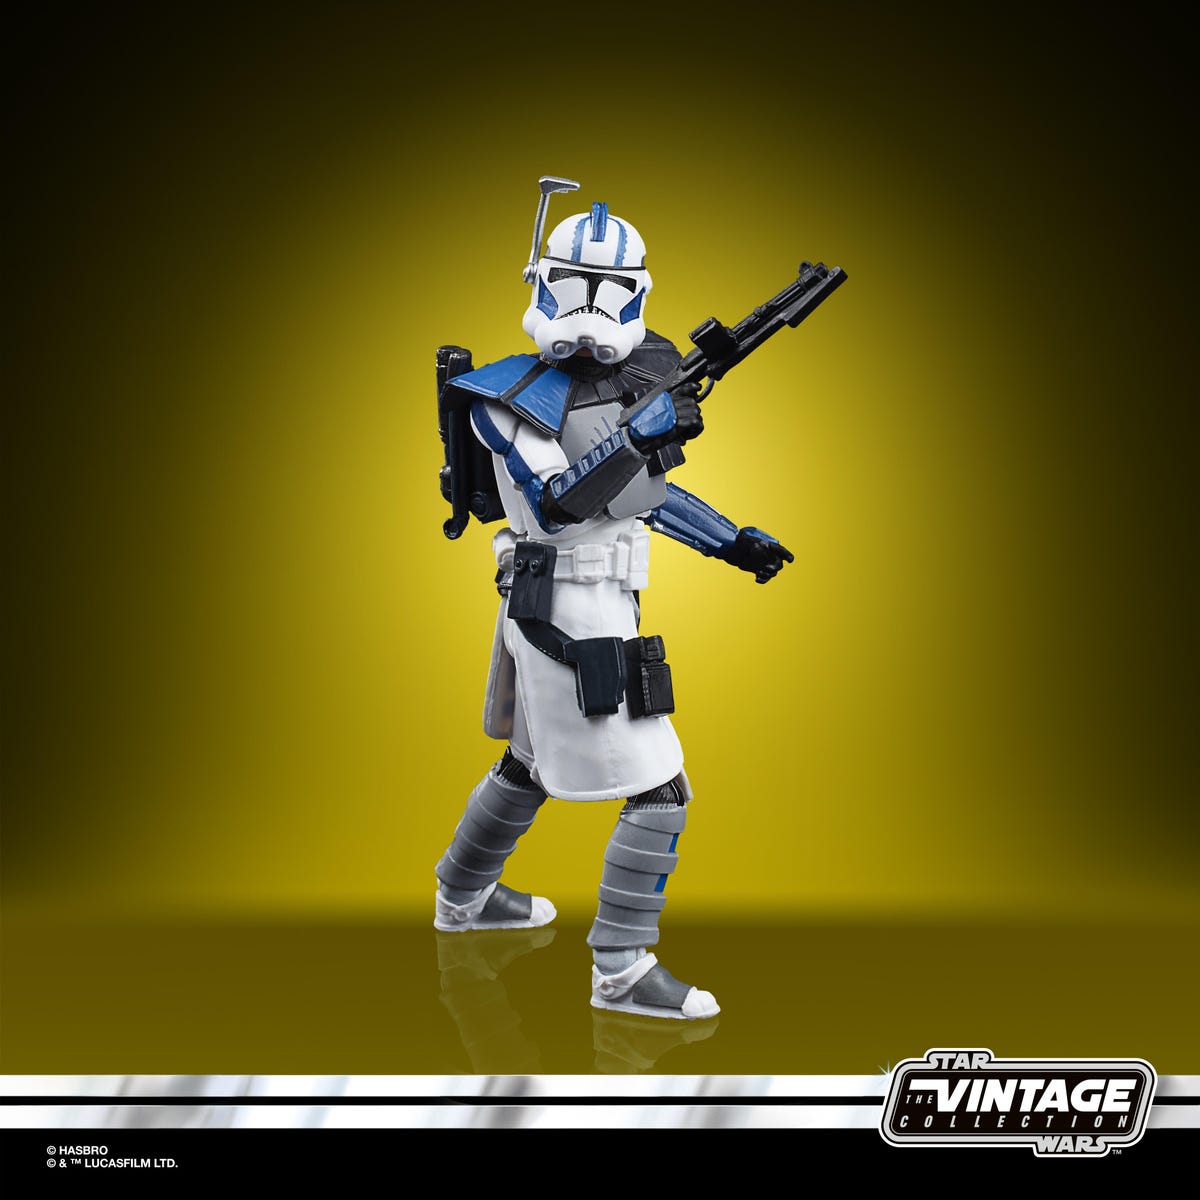 star-wars-the-vintage-collection-star-wars-the-clone-wars-501st-legion-arc-troopers-figure-3-pack-oop-7